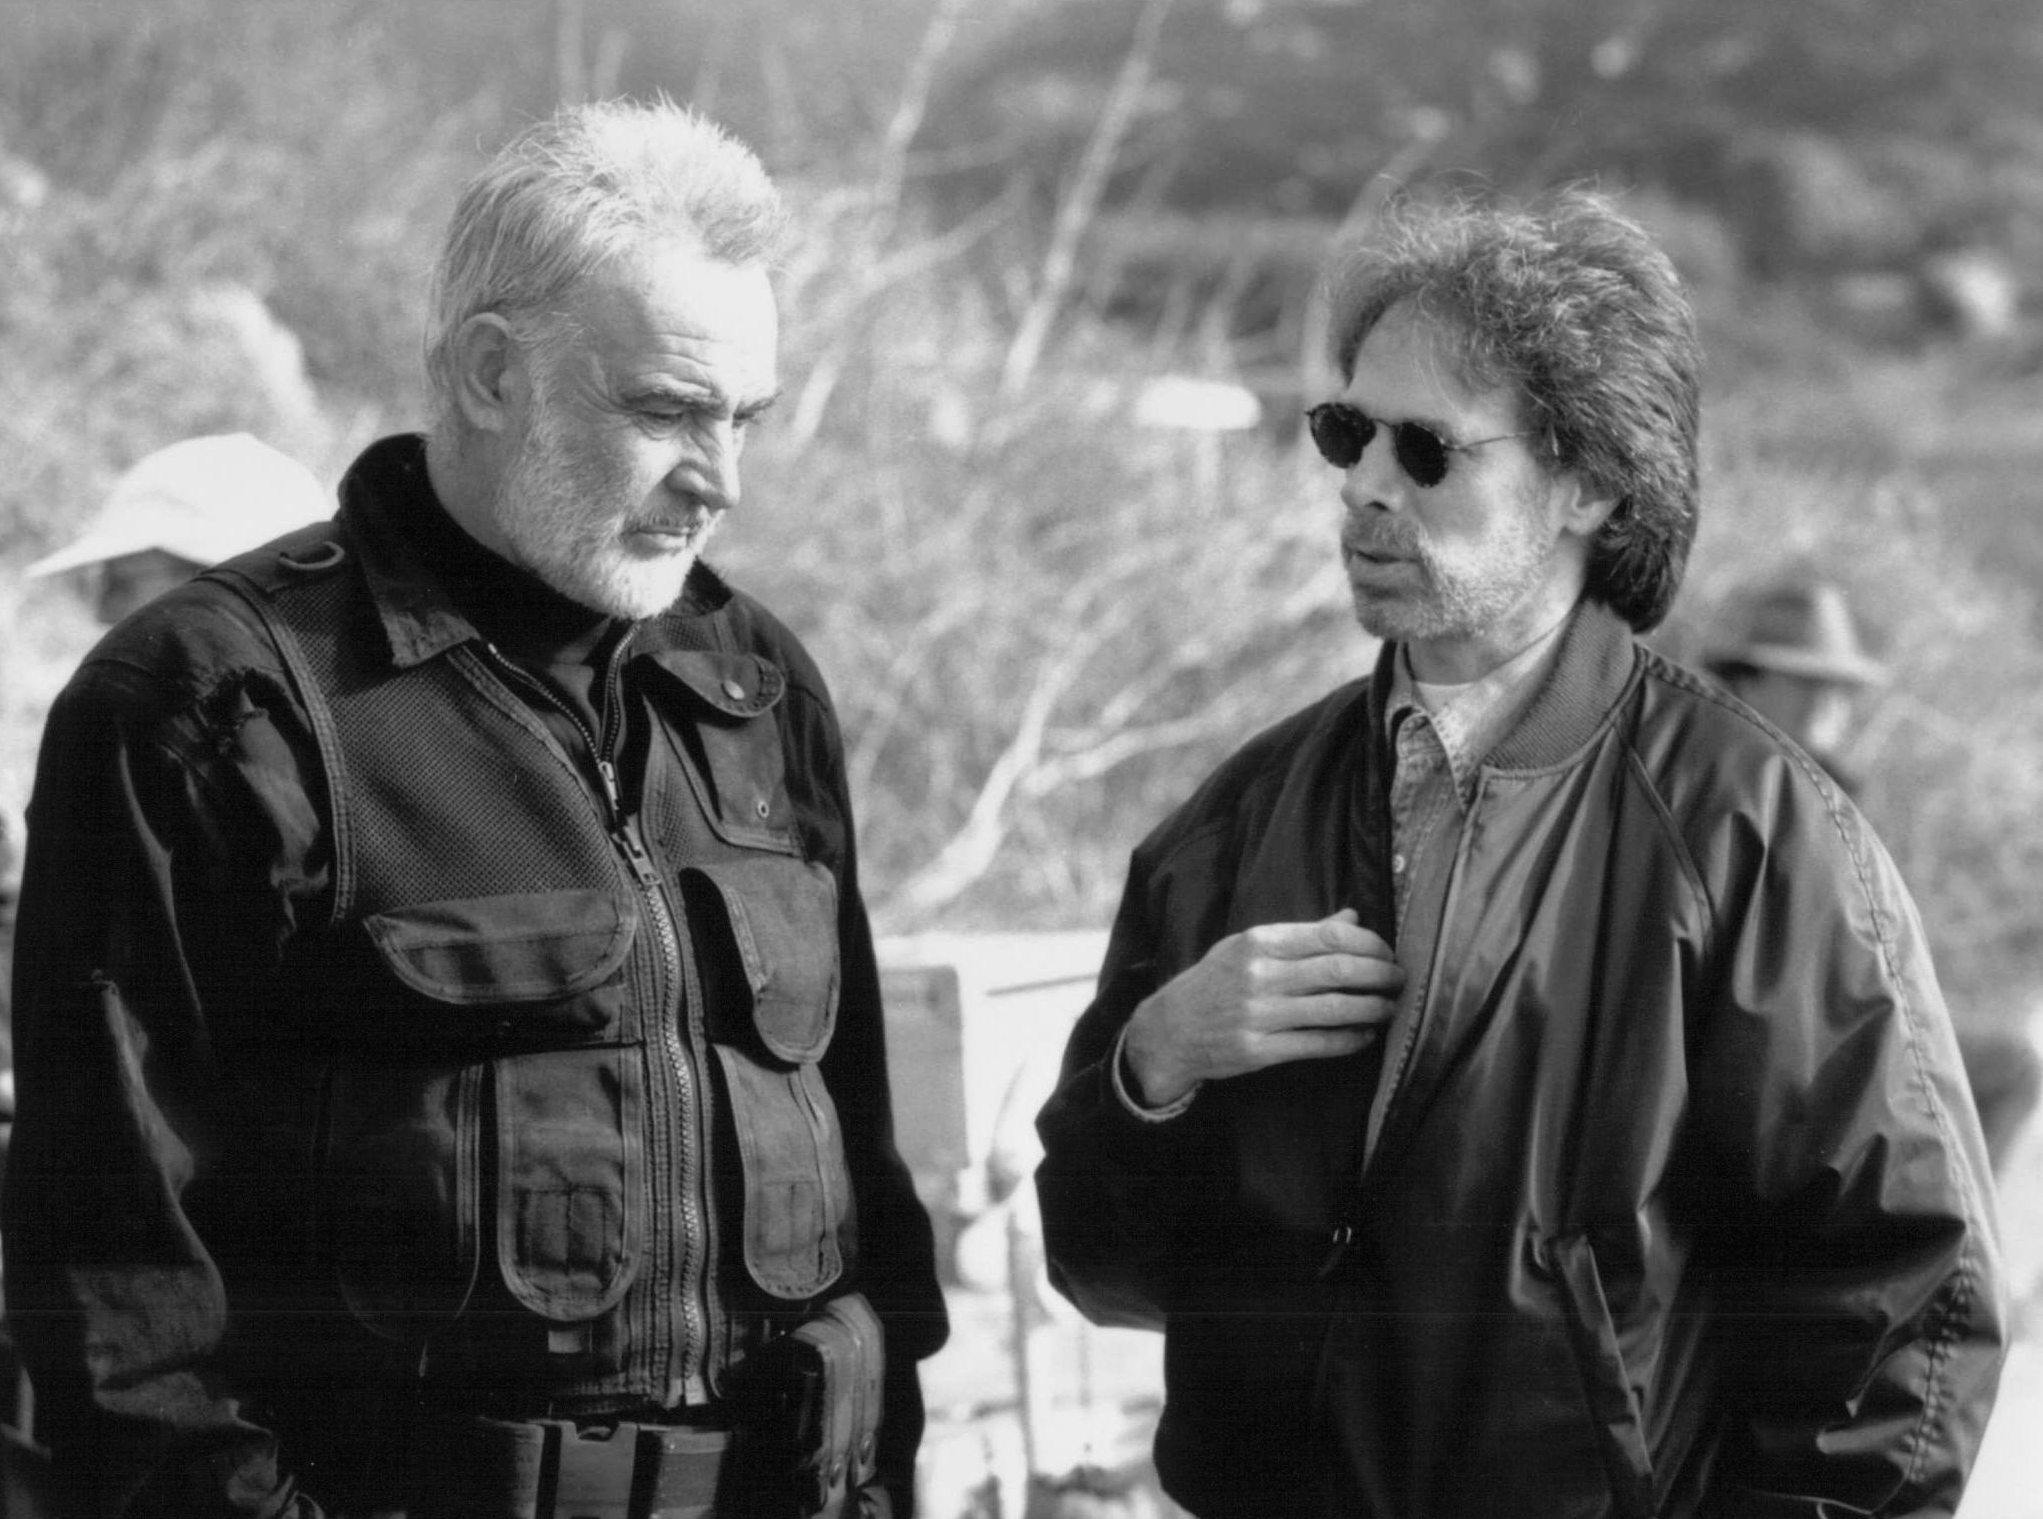 Sean Connery and Jerry Bruckheimer in The Rock (1996)